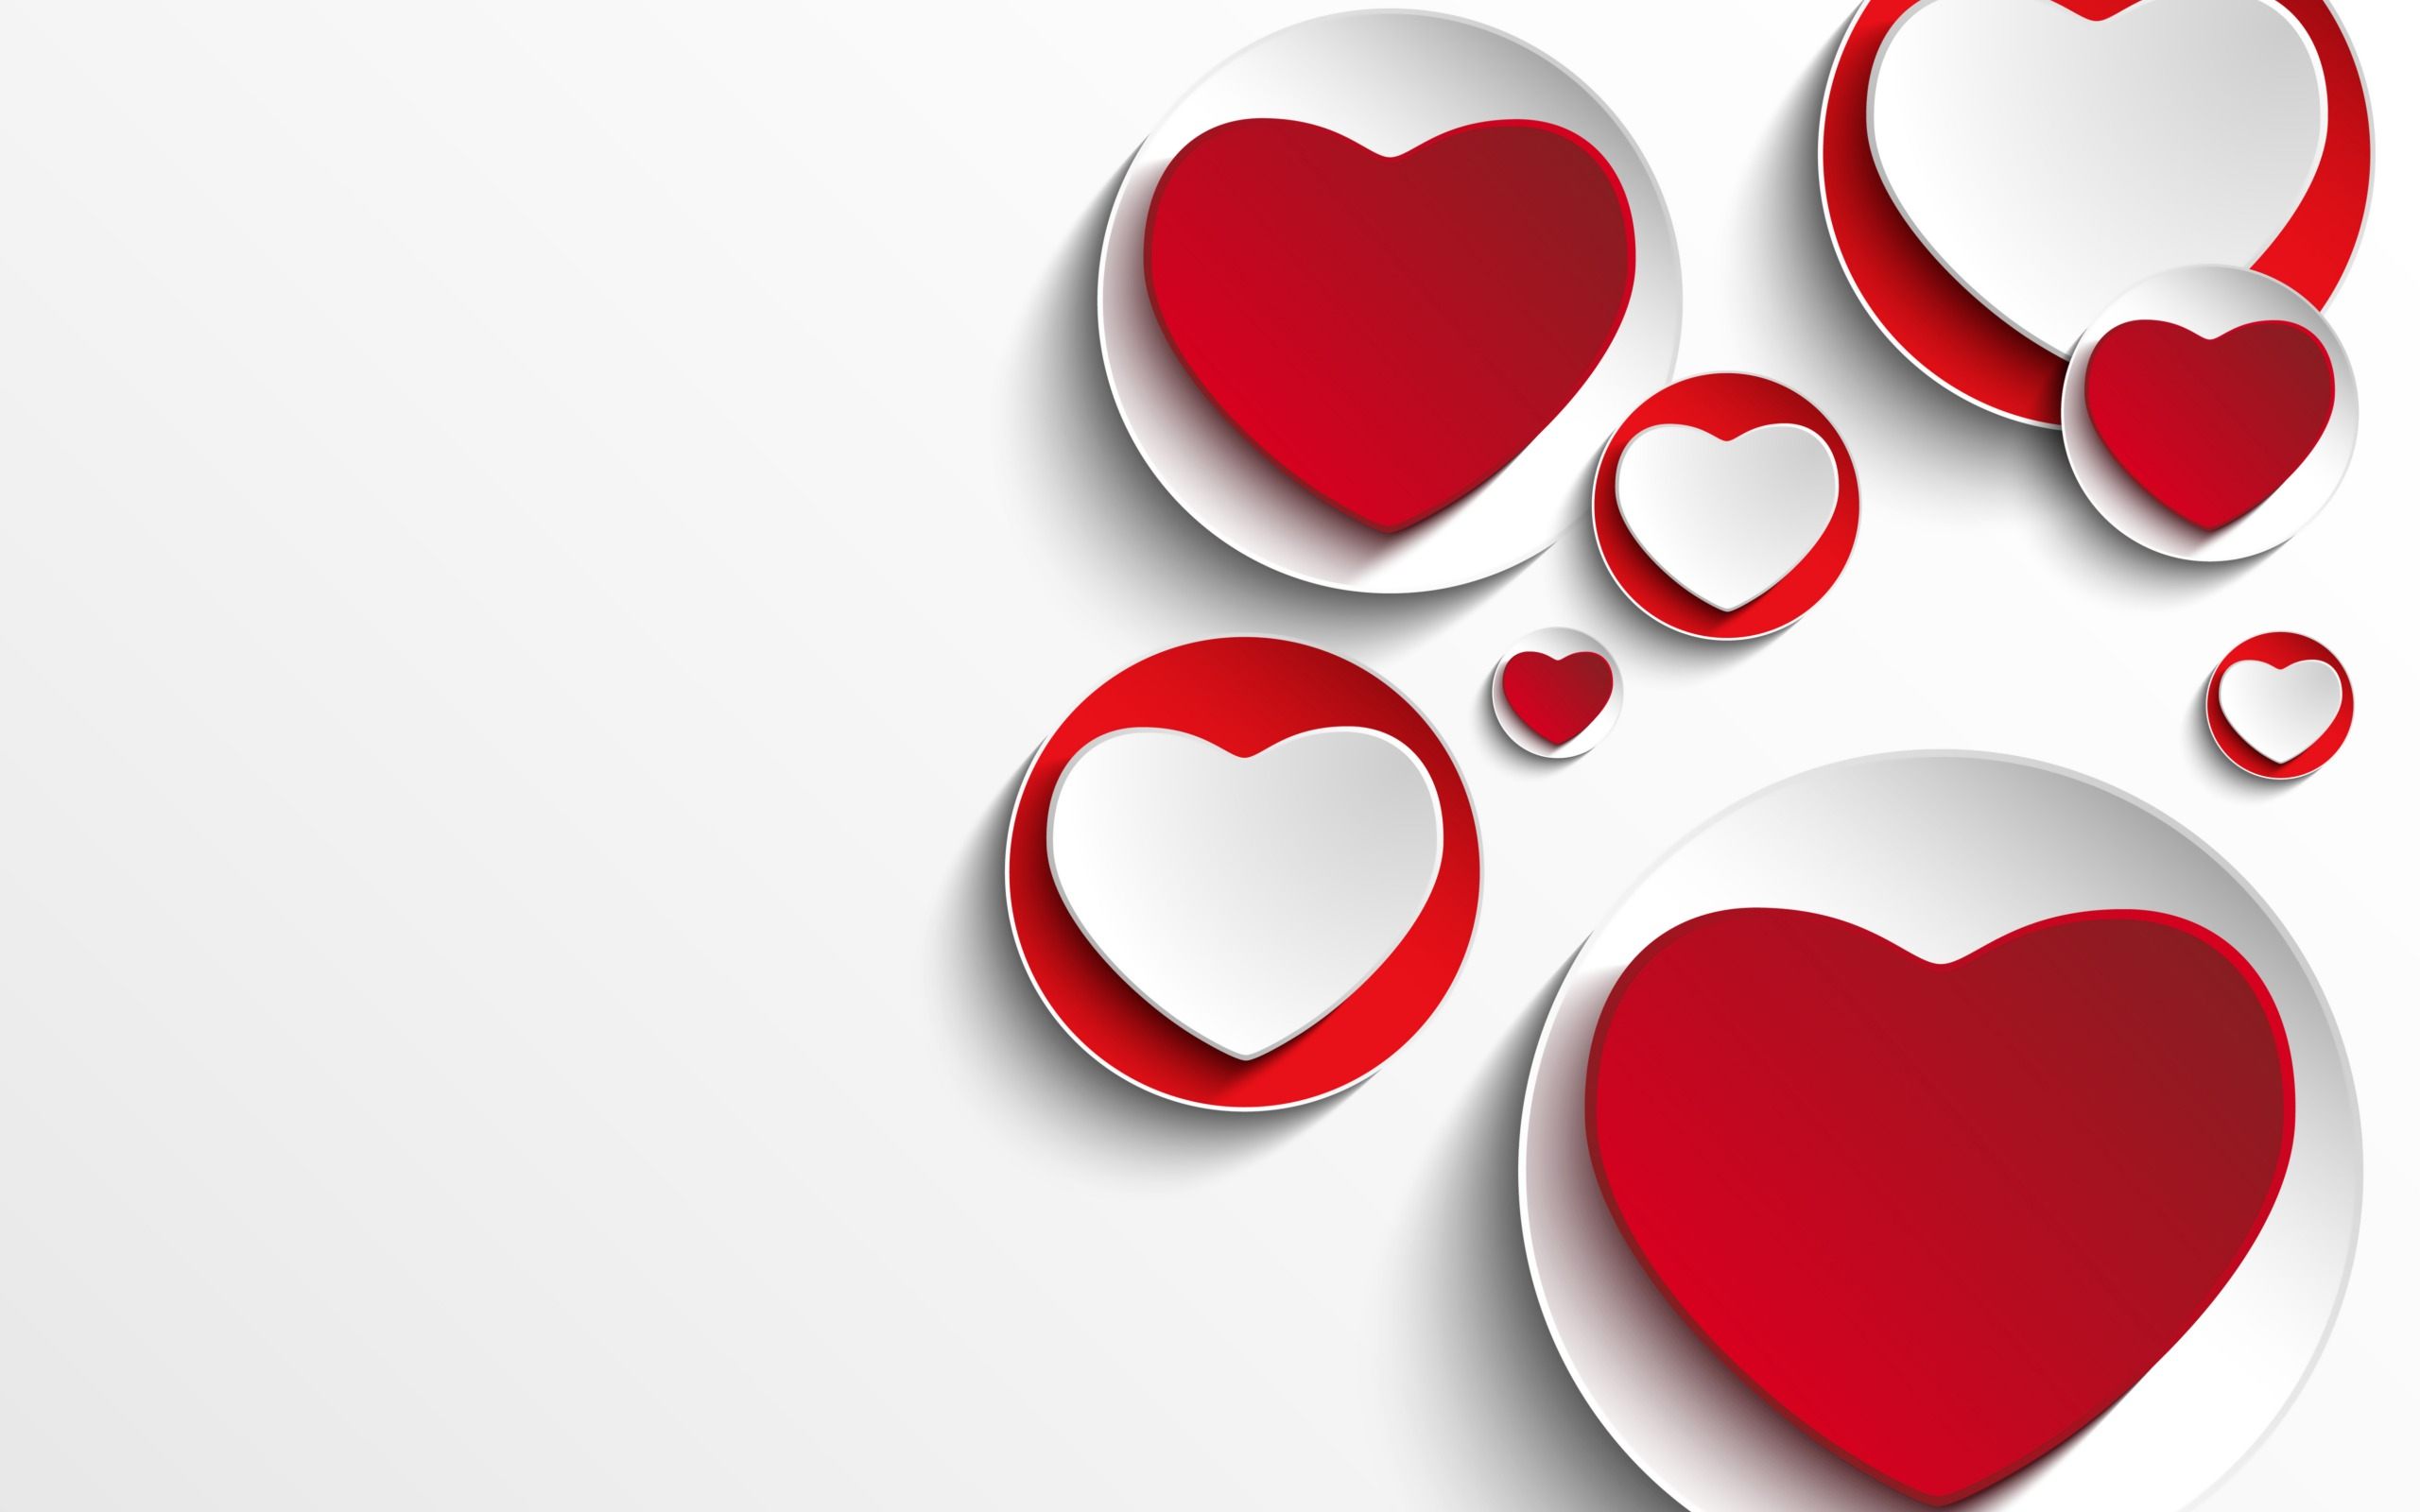 11 Awesome And Beautiful Love Wallpapers